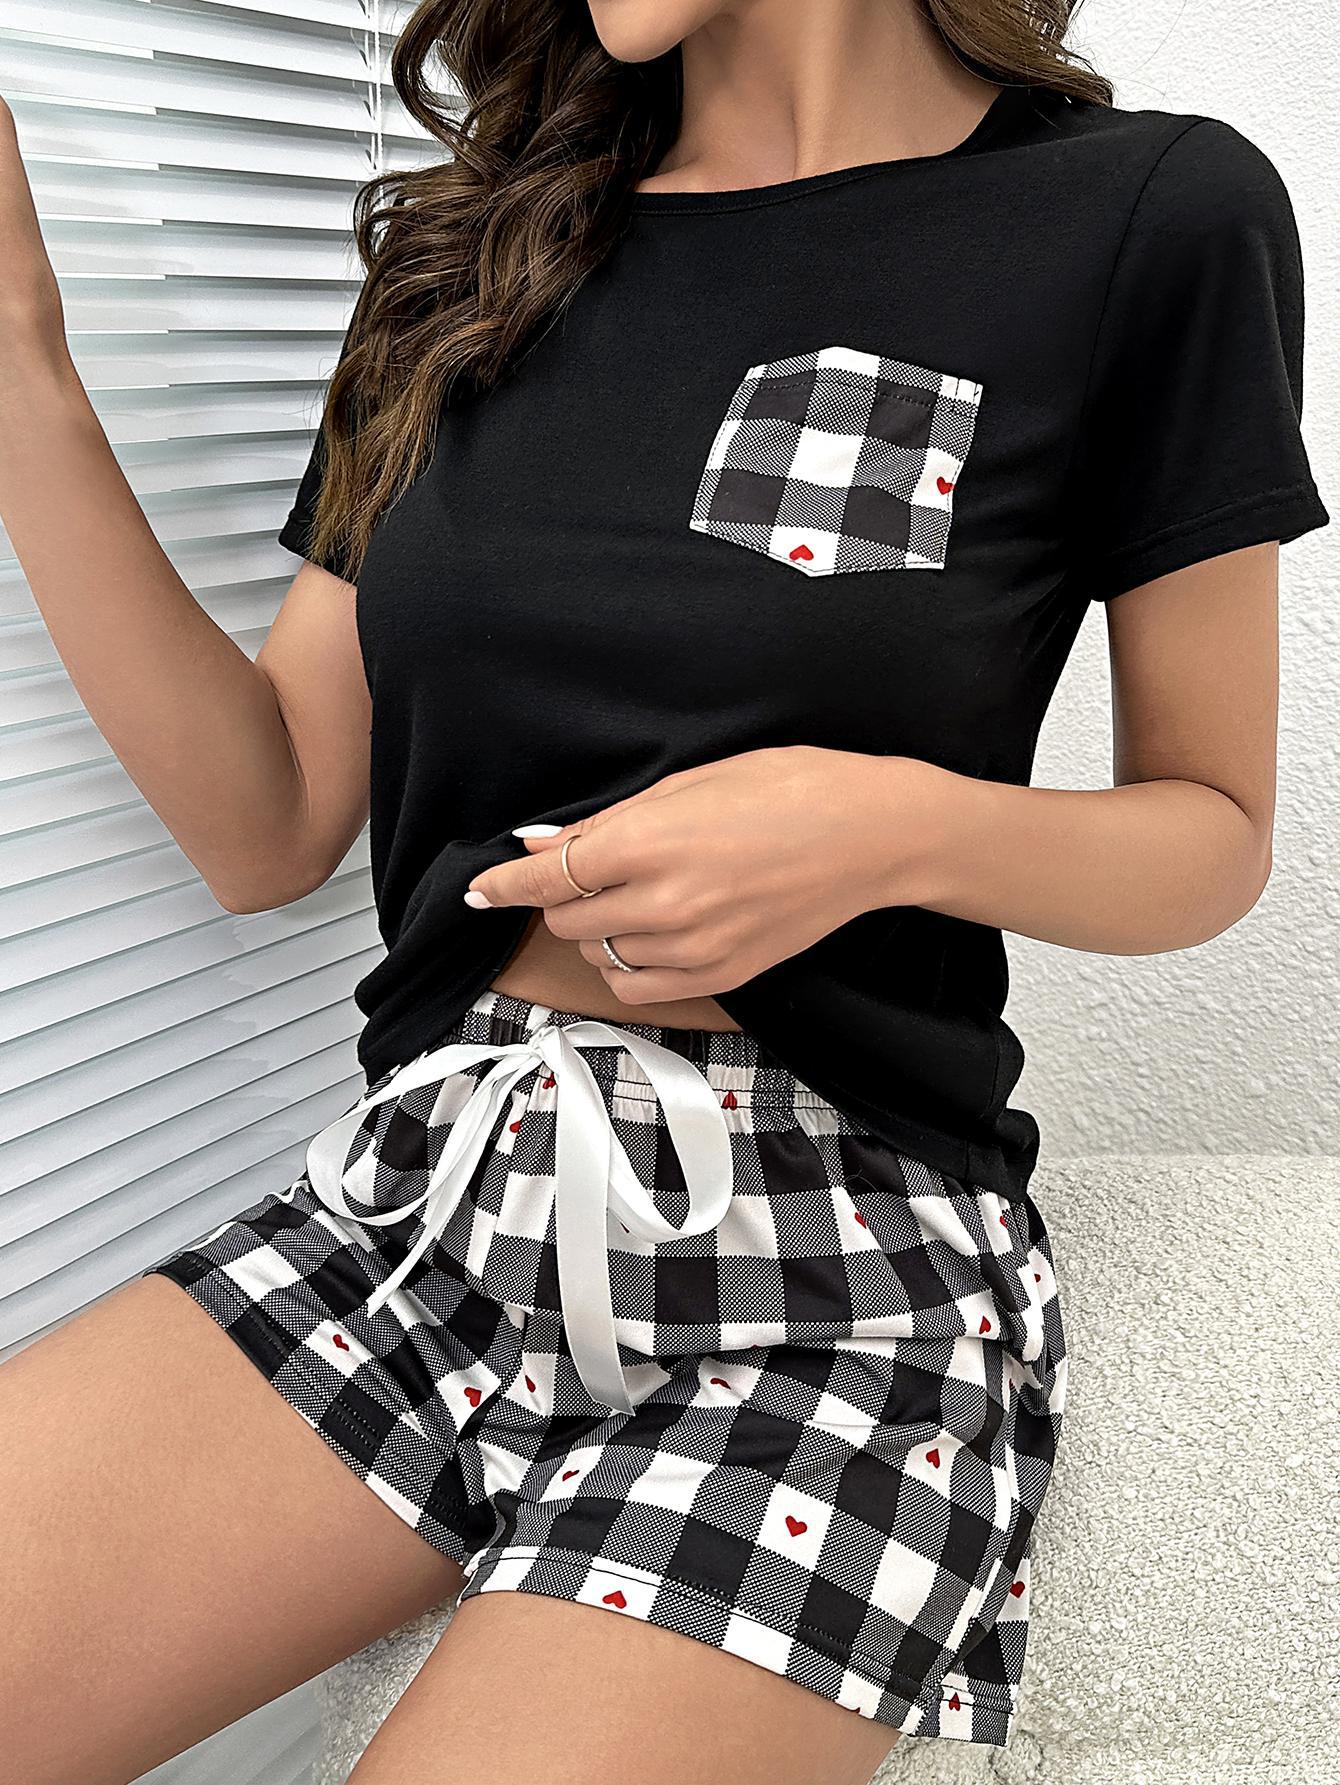 Upgrade your loungewear game with our Plaid Heart Top and Shorts Lounge Set. Comfort meets style for the modern woman. Shop now!